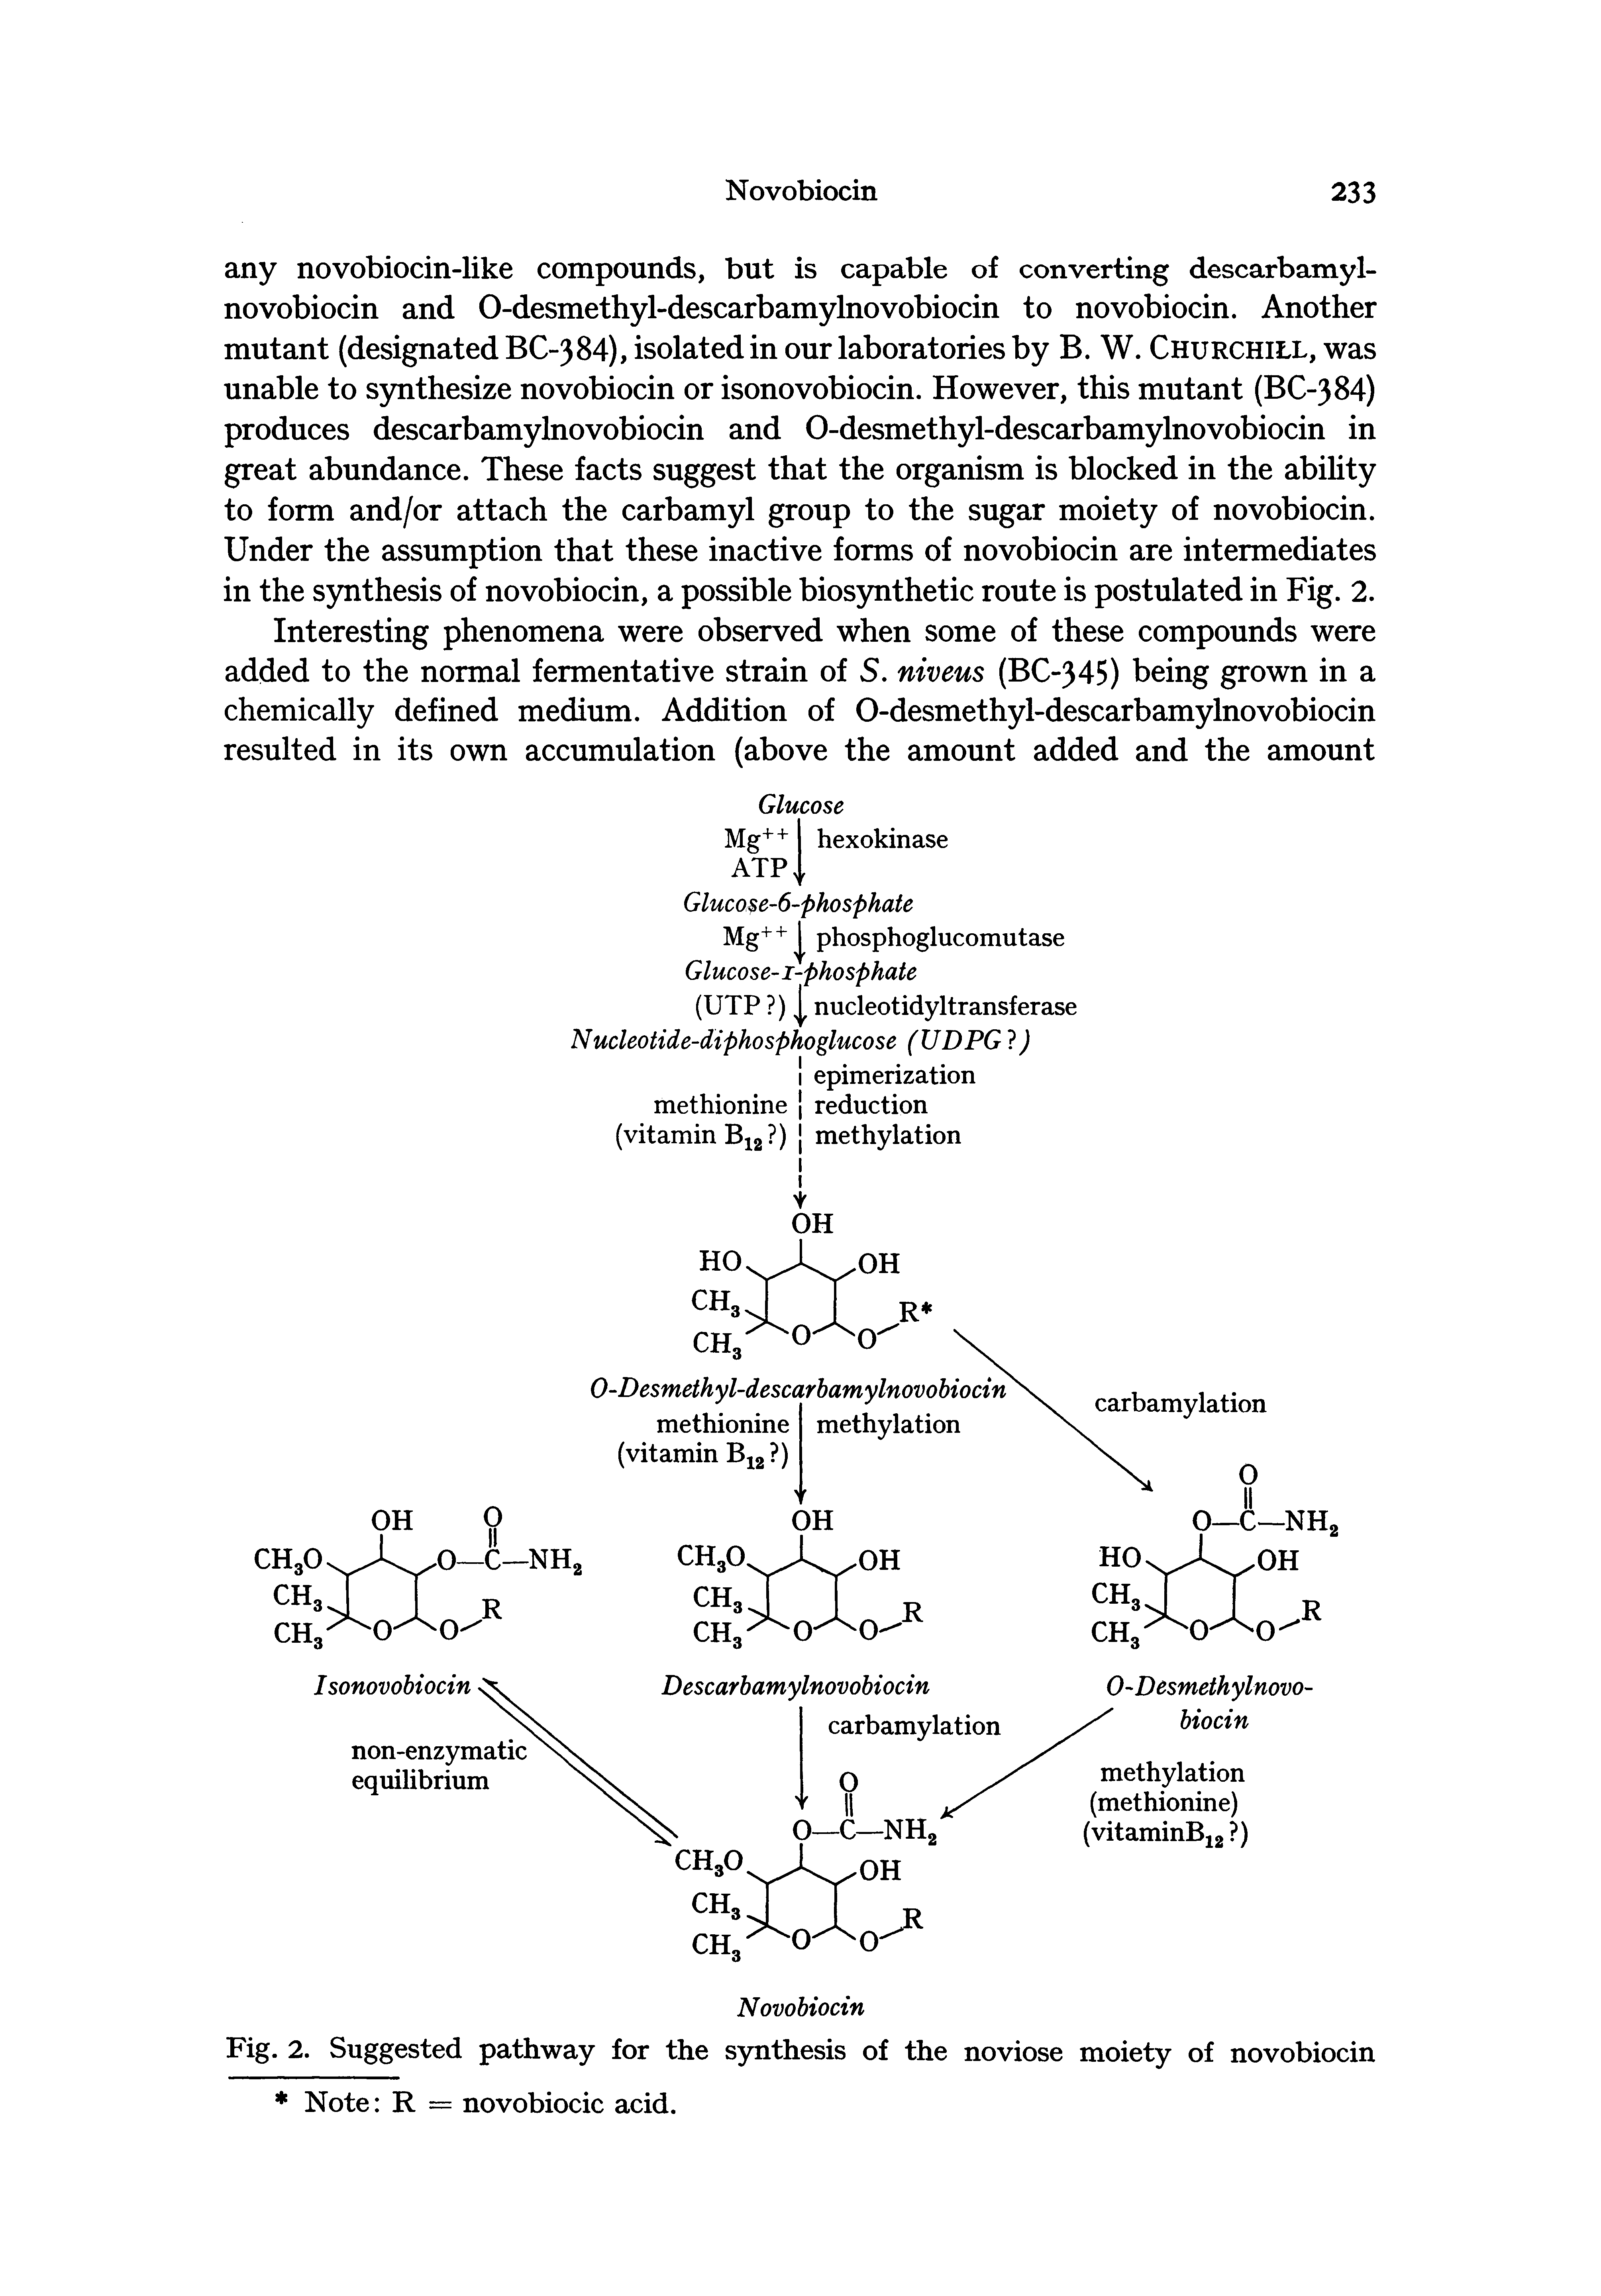 Fig. 2. Suggested pathway for the synthesis of the noviose moiety of novobiocin Note R = novobiocic acid.